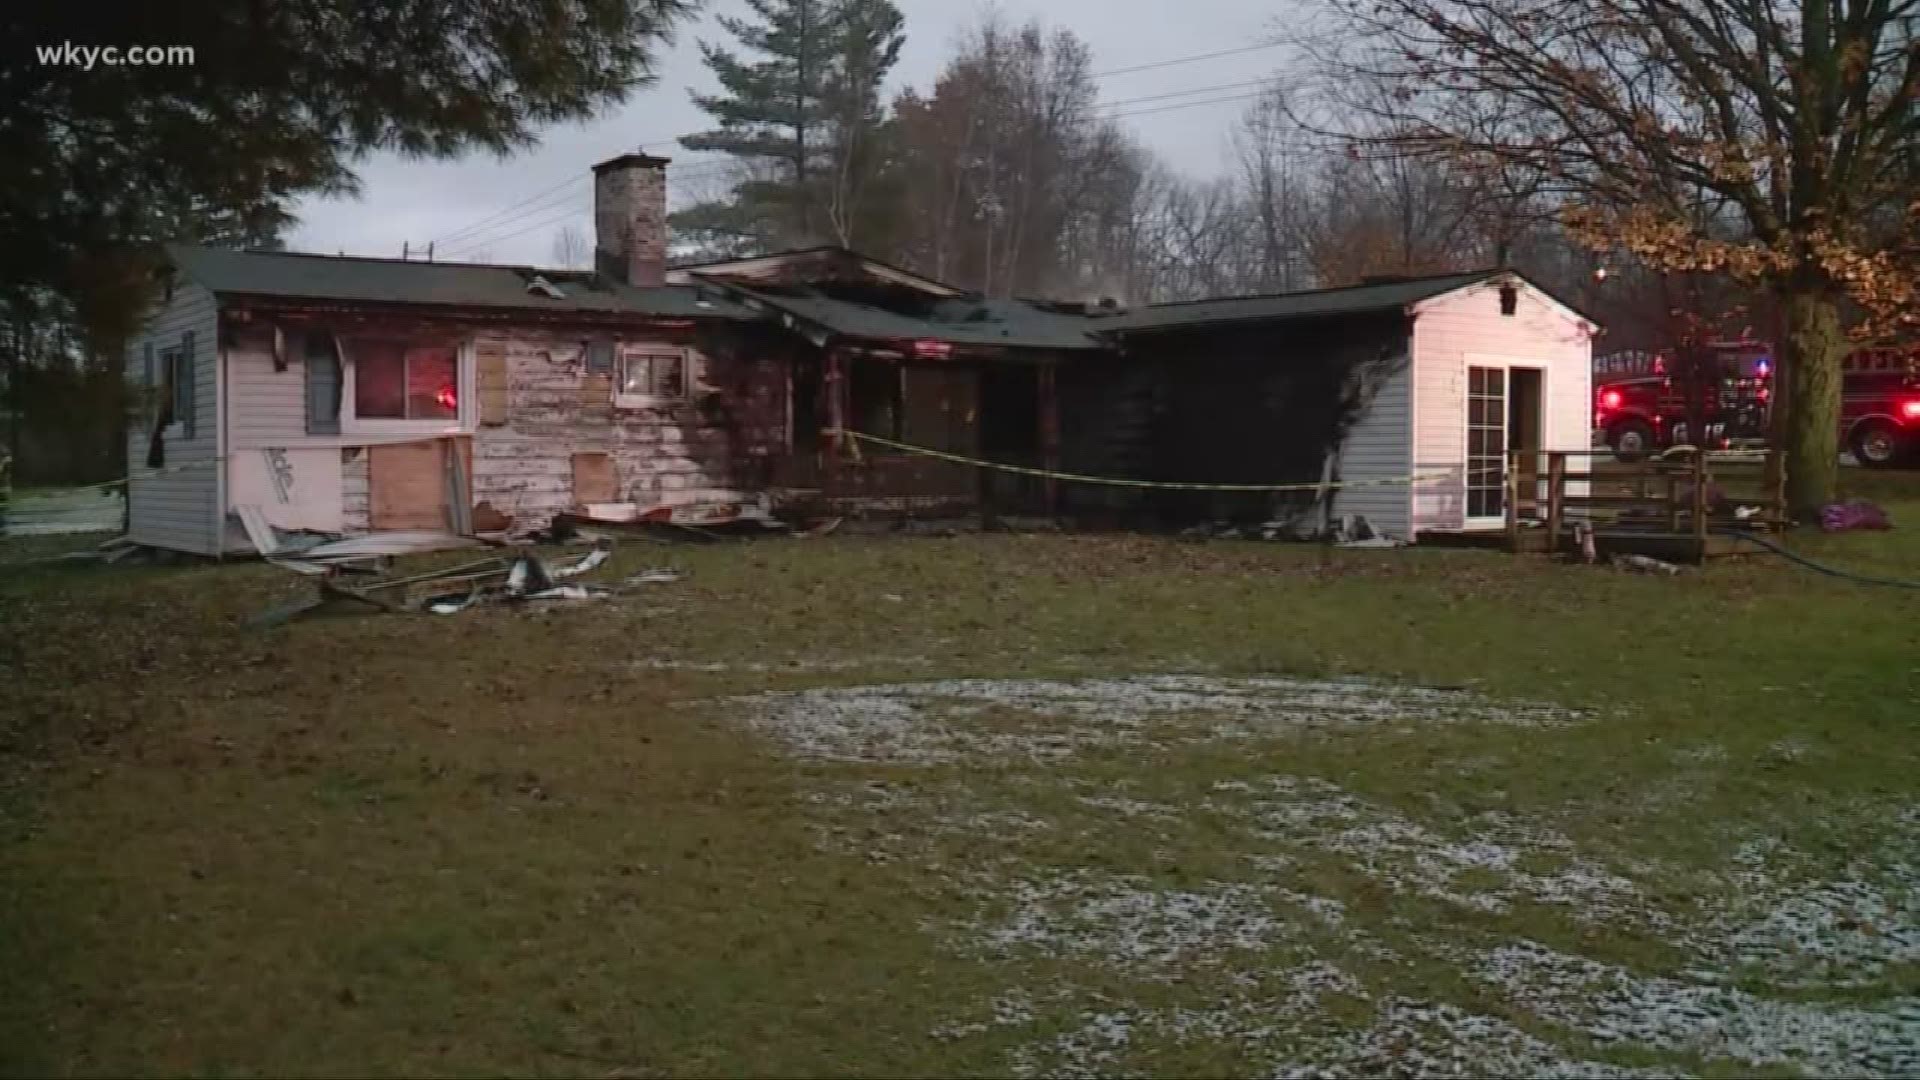 Four people have been hospitalized for smoke inhalation following a house fire at a home at Thwing and Auburn roads.